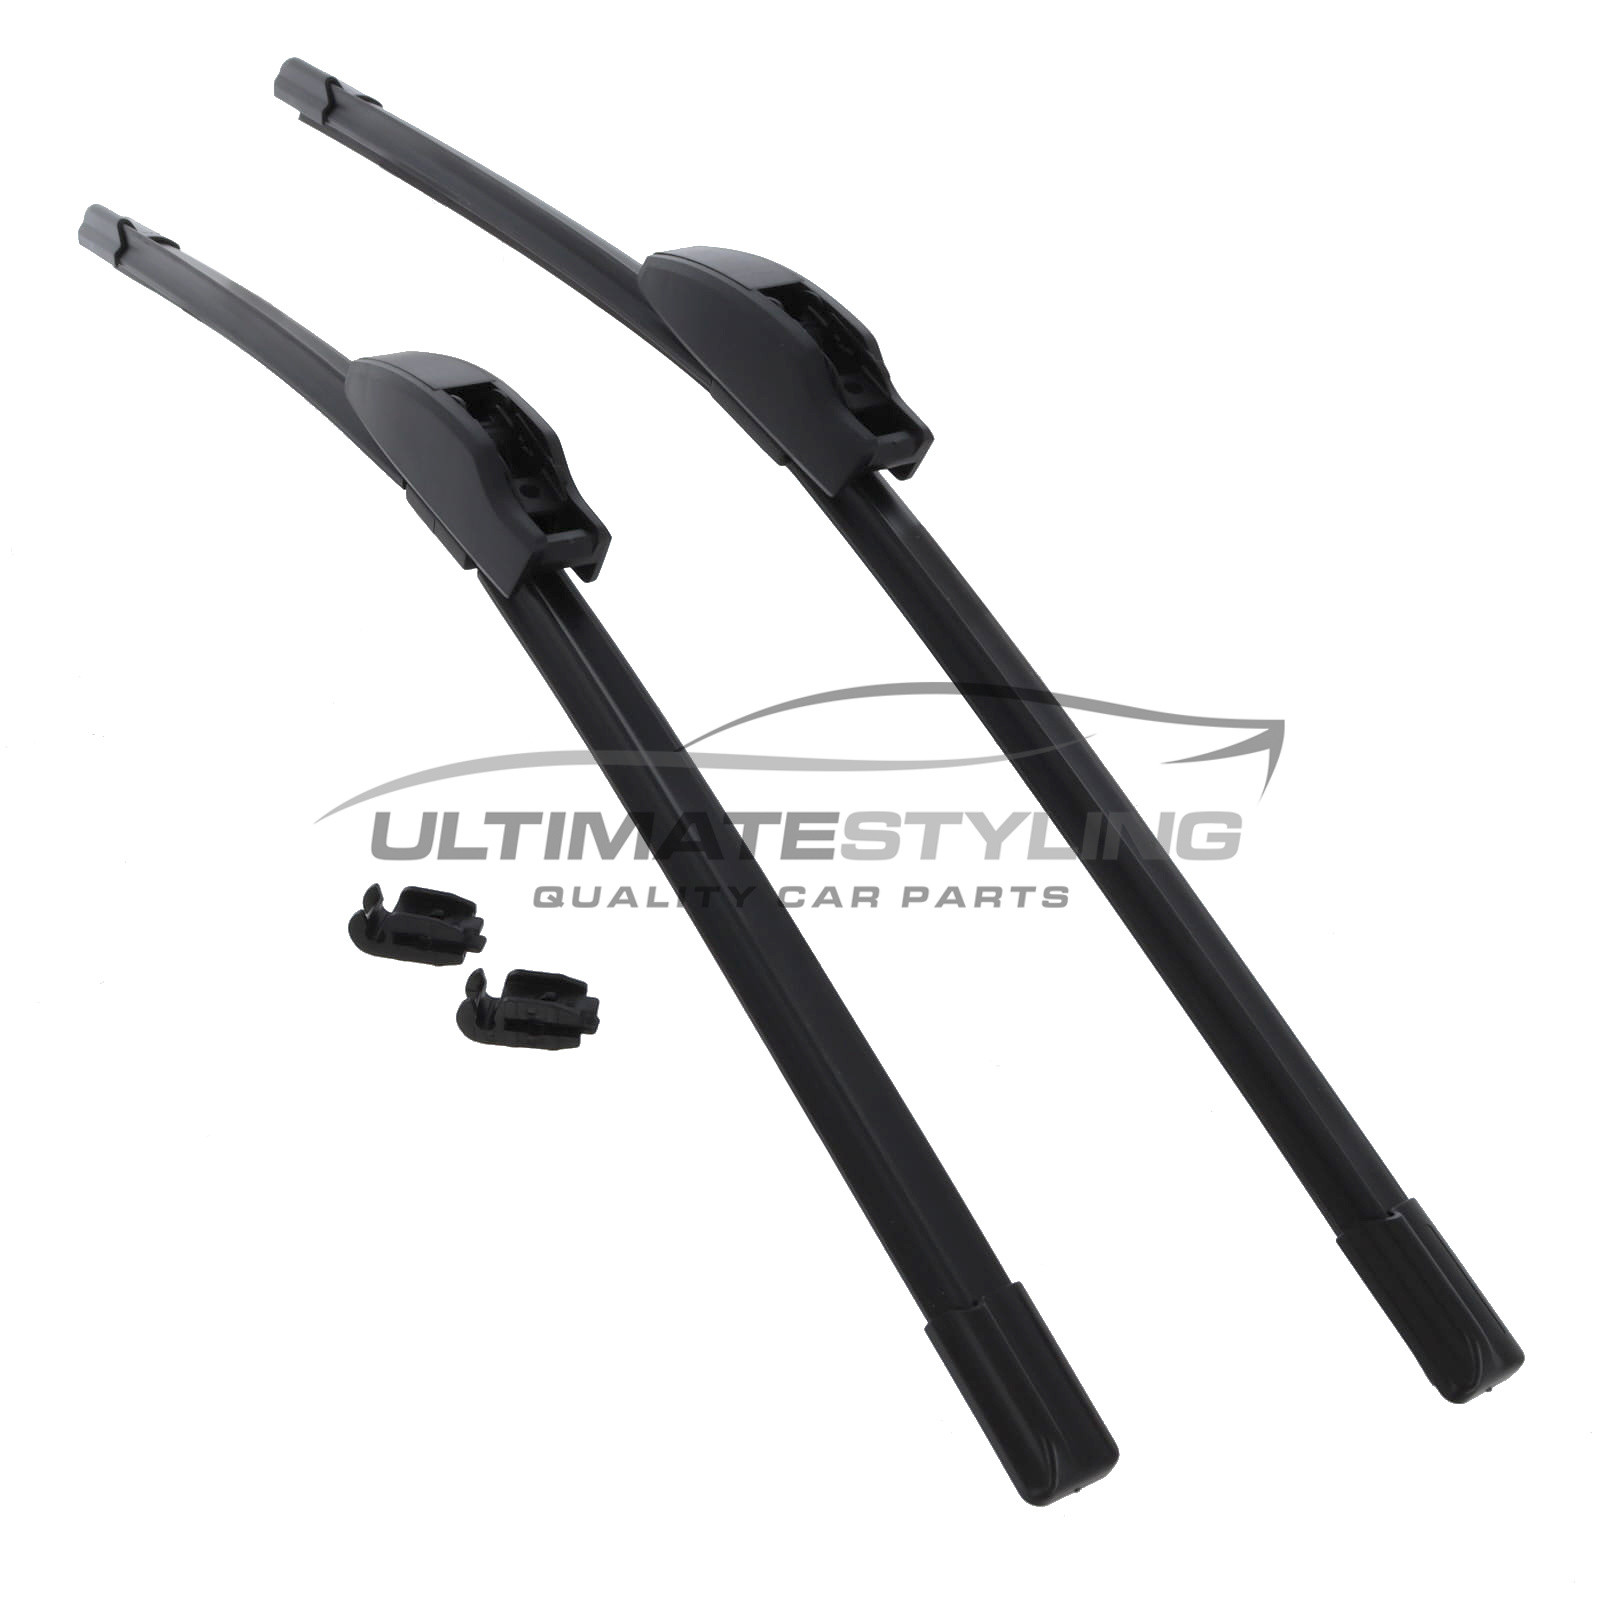 Drivers Side & Passenger Side (Front) Wiper Blades for Mercedes Benz 300 Series